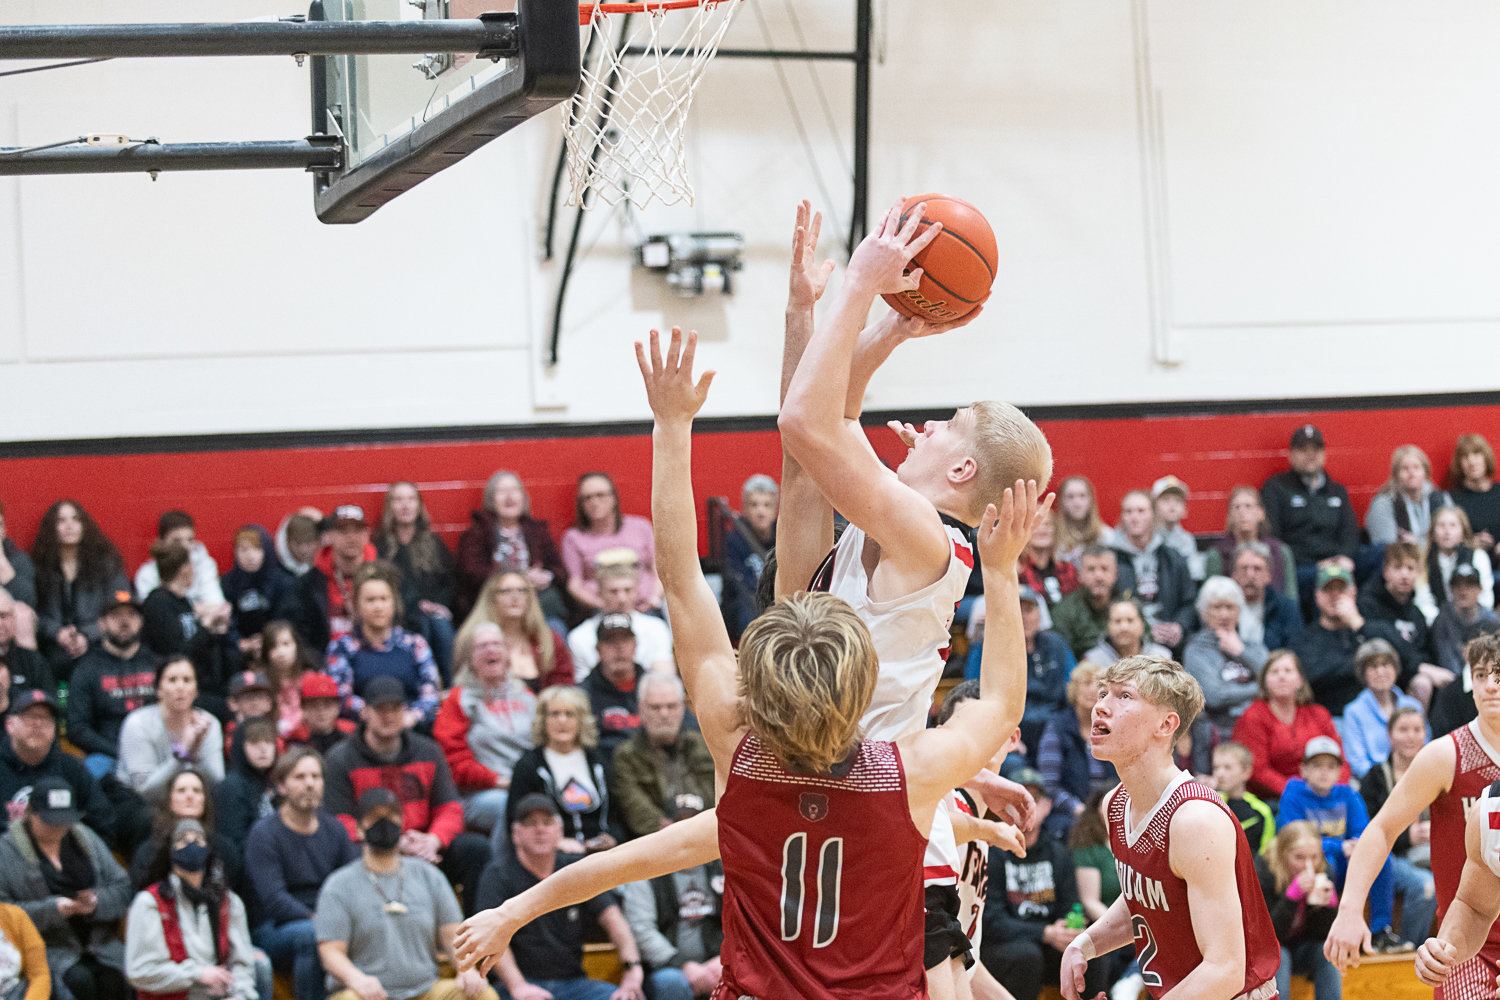 Austin Gonia goes up in traffic during the first quarter of Tenino's 47-33 loss to Hoquiam on Jan. 24.